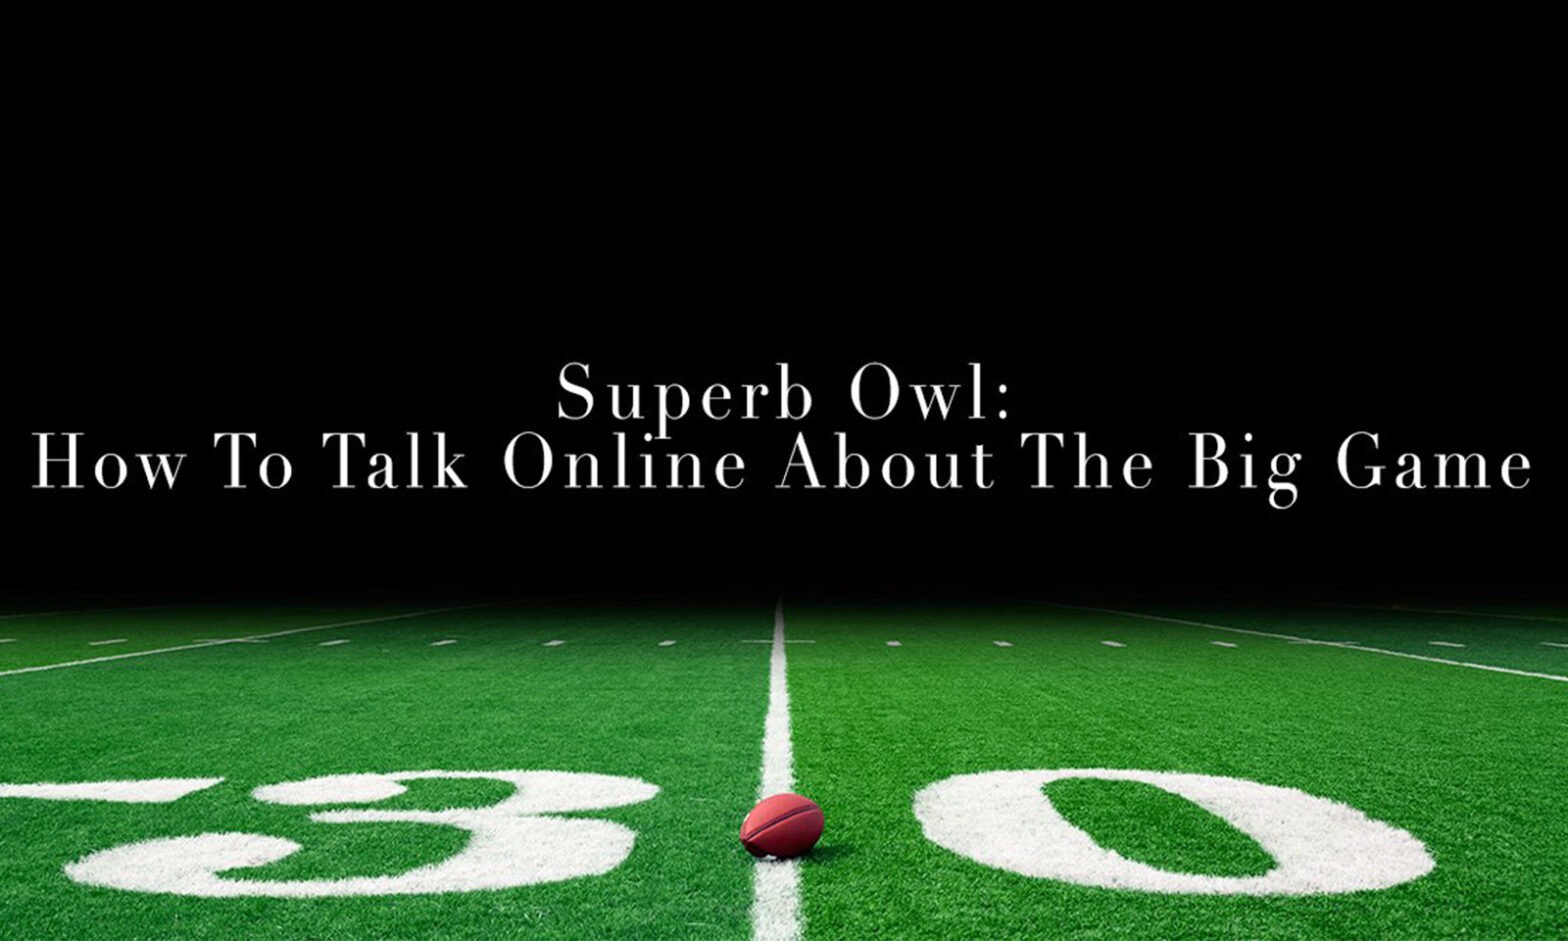 Featured image for post: Superb Owl: How To Talk Online About The Big Game